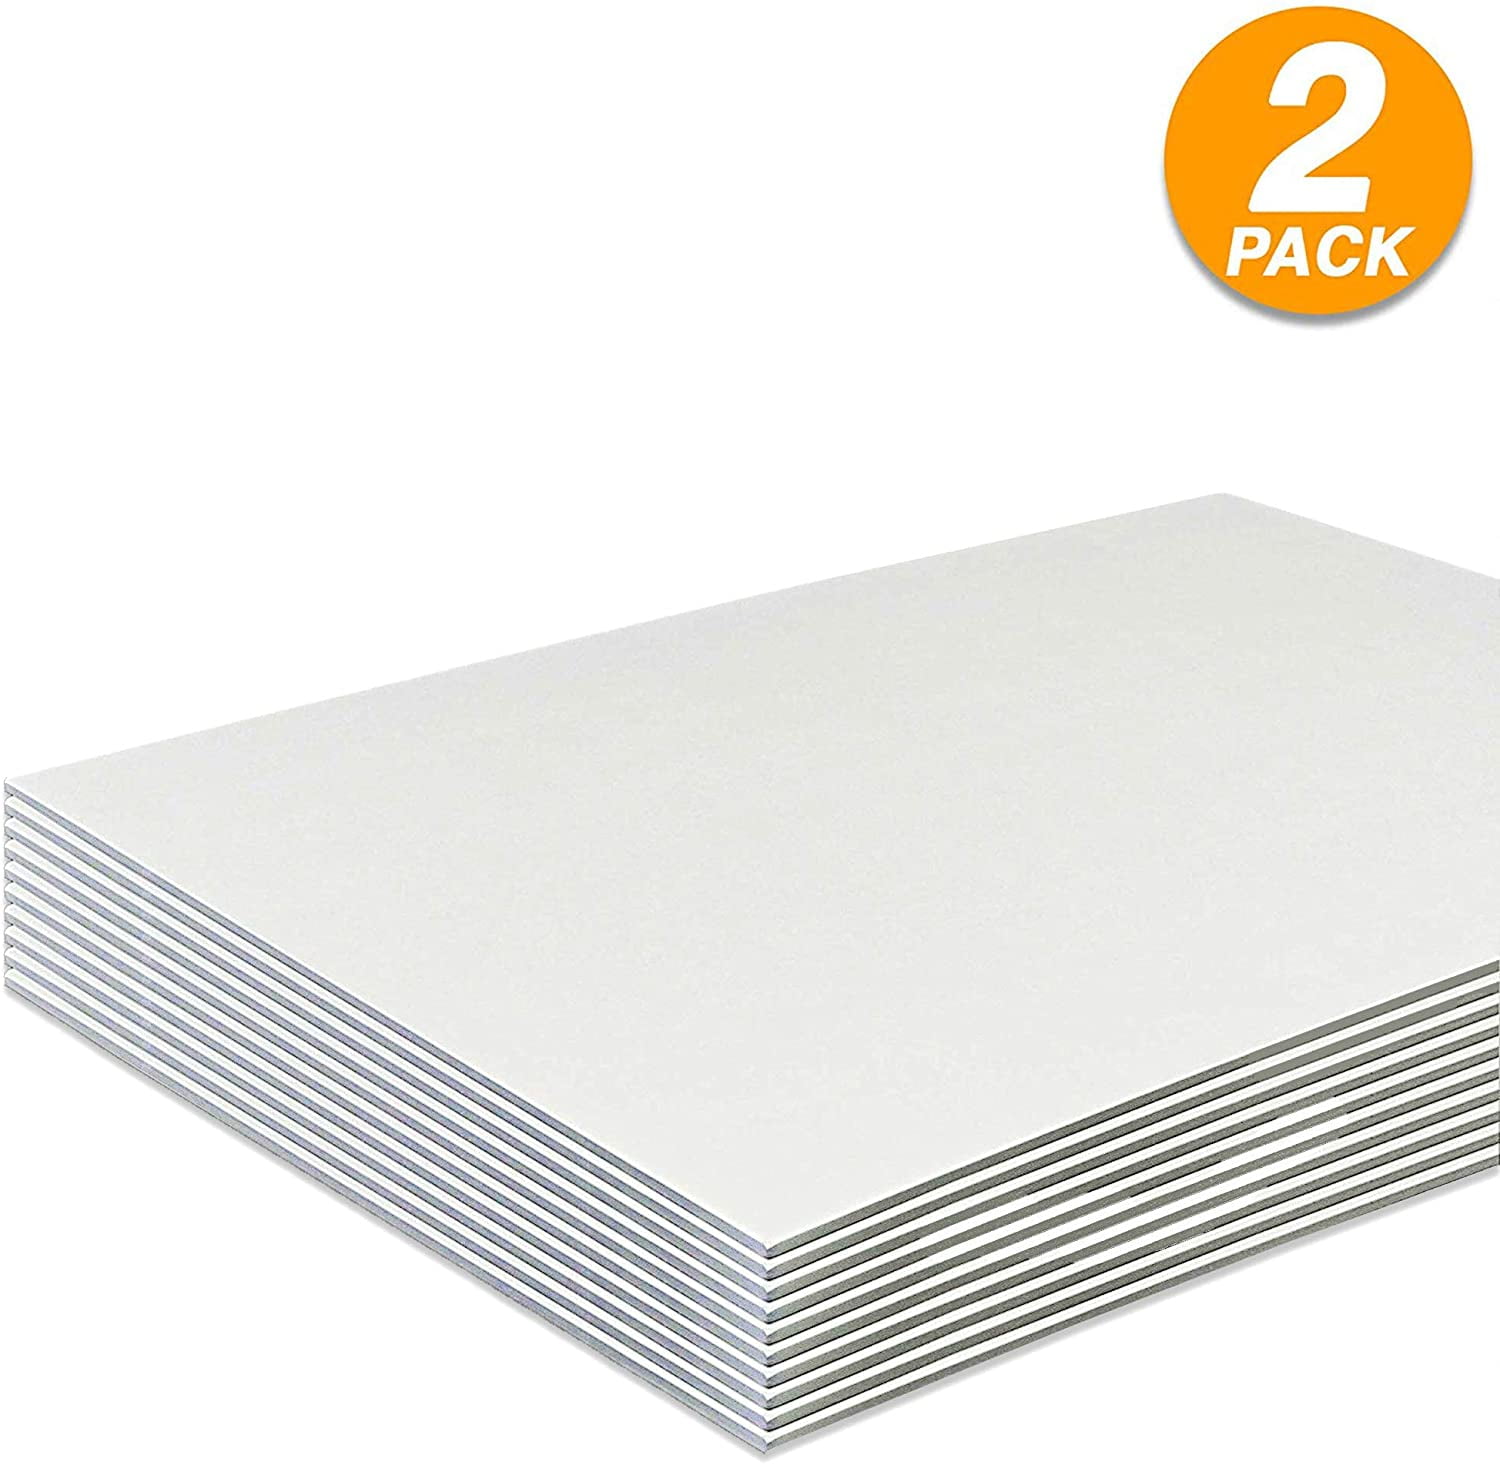 Foam Core Backing Board 3/16 White 24x36-5 Pack. Many Sizes Available.  Acid Free Buffered Craft Poster Board for Signs, Presentations, School,  Office